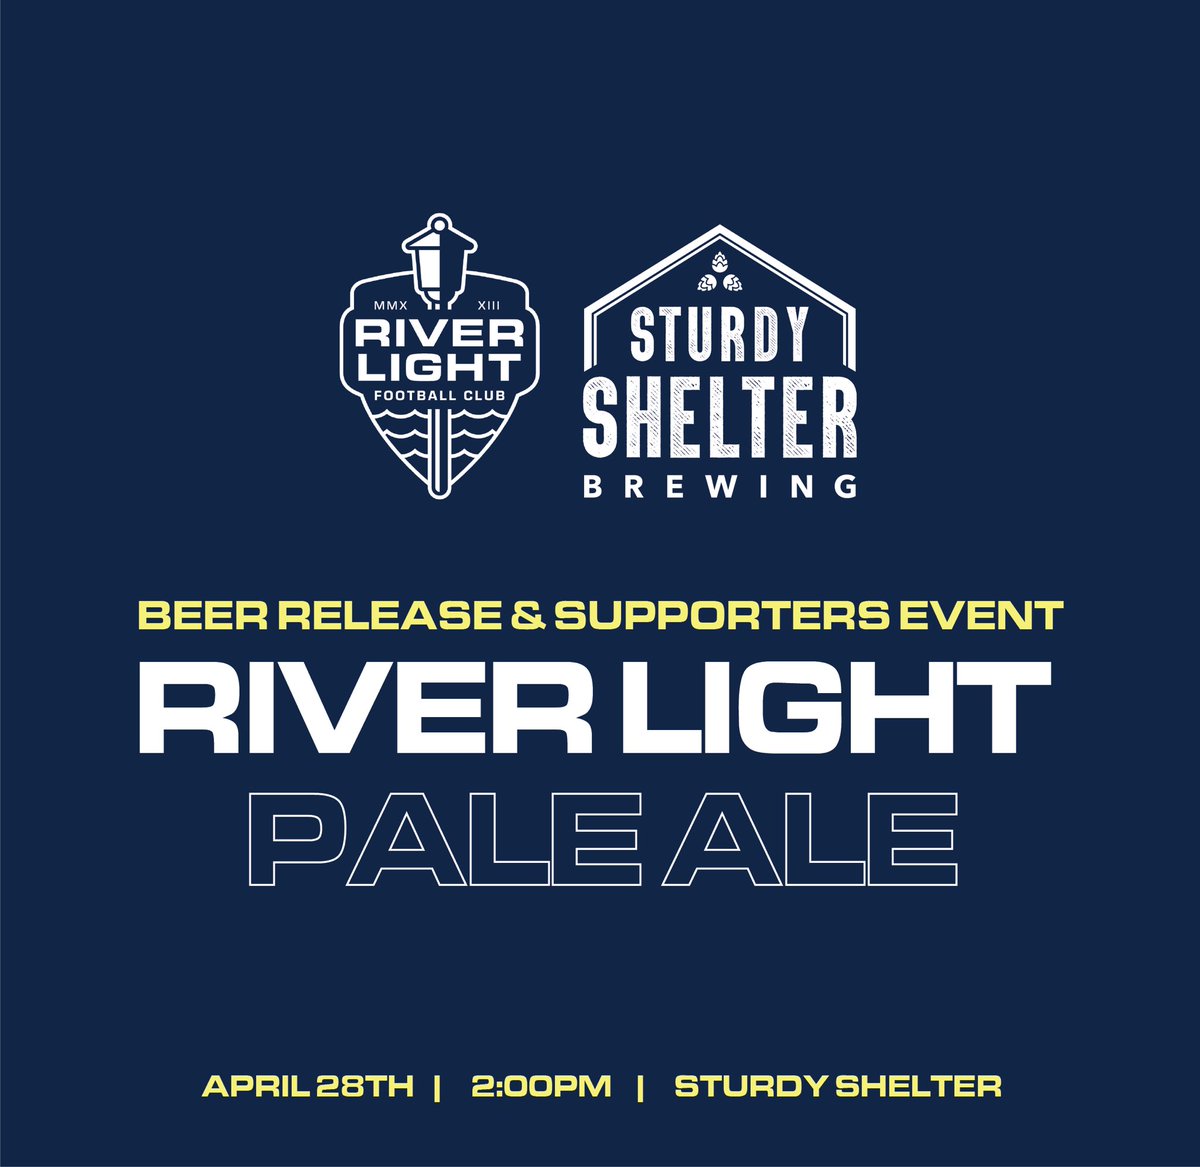 It’s nearly ready 🍻 Join us April 28th at @sturdyshelterbrewing for the release of our 𝗥𝗶𝘃𝗲𝗿 𝗟𝗶𝗴𝗵𝘁 𝗣𝗮𝗹𝗲 𝗔𝗹𝗲! Enjoy beer, play Bingo, check out merch and meet River Light FC staff 🔆 app.gopassage.com/events/sturdy-…